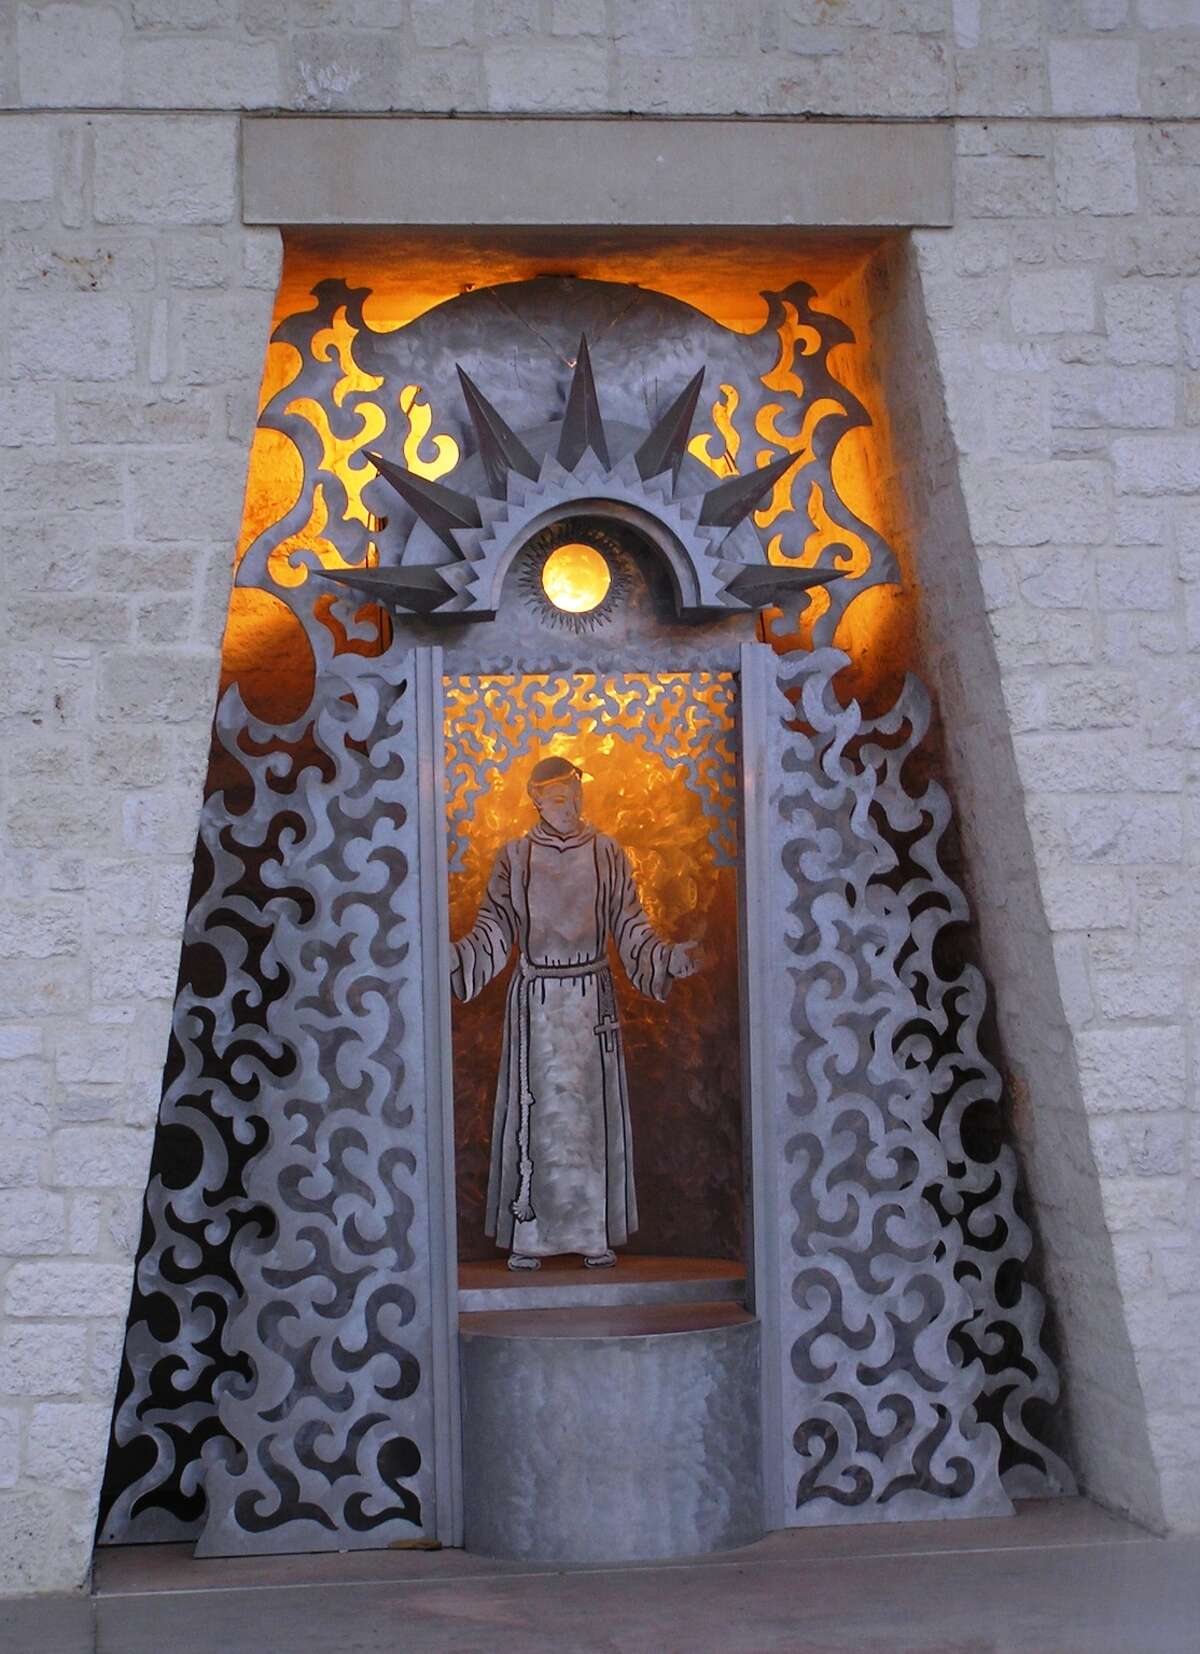 San Antonio artist Cakky Brawley paid homage to Saint Anthony of Padua, the city's namesake, in her grotto sculpture at the Henry B. Gonzalez Convention Center.